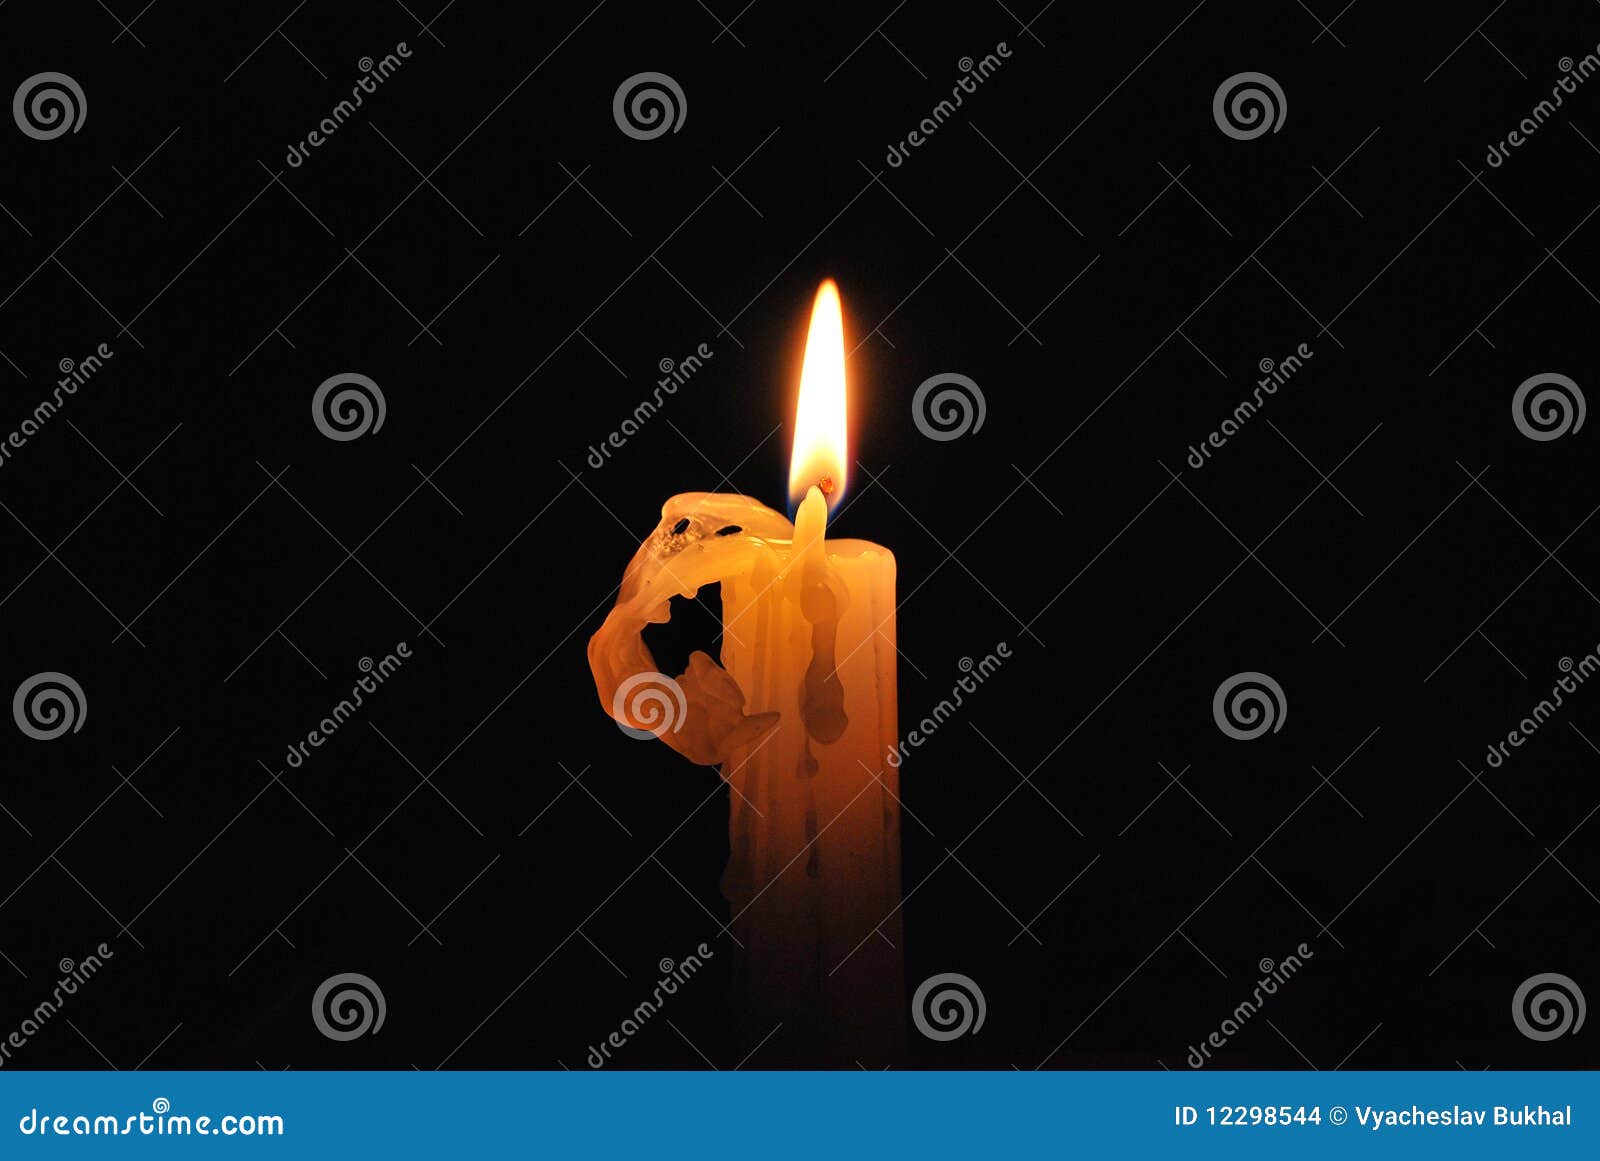 candle lit in the darkness